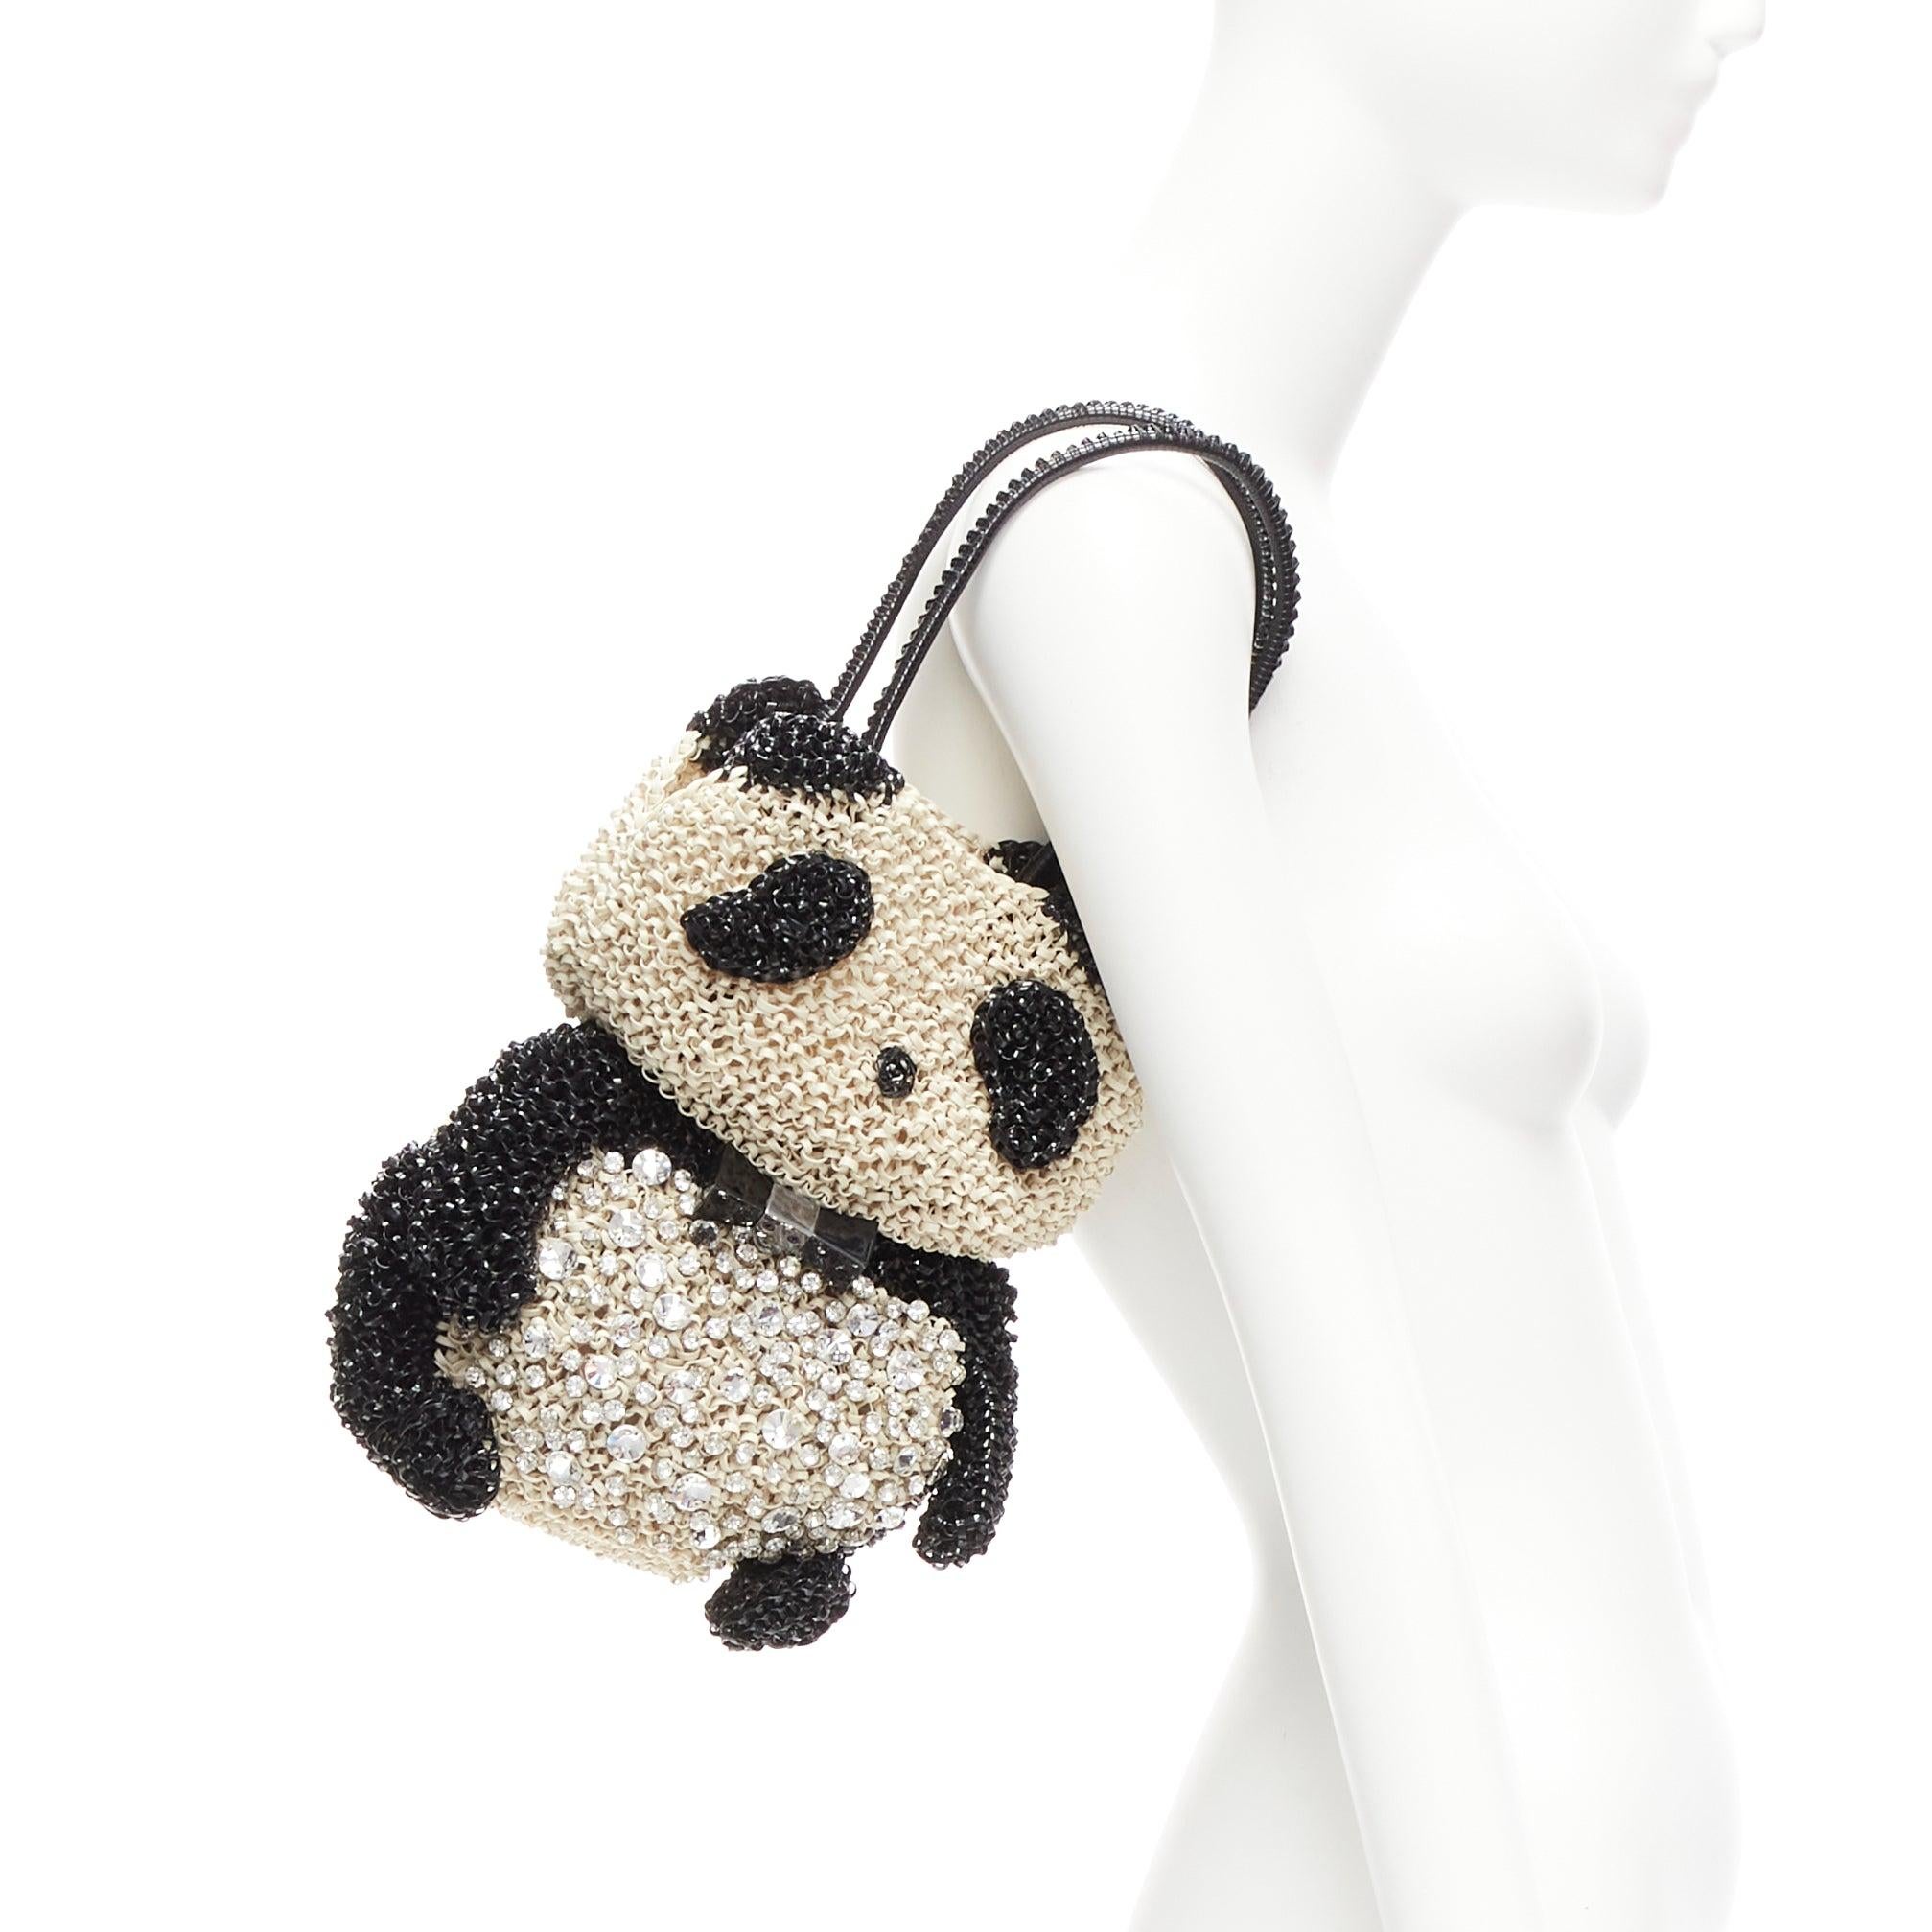 rare ANTEPRIMA Wire Bag black cream rhinestone crystal Panda tote
Reference: ANWU/A01072
Brand: Anteprima
Collection: Wire Bag
Material: Plastic
Color: Cream
Pattern: Solid
Extra Details: Acrylic bowtie and clear crystal embellishments at